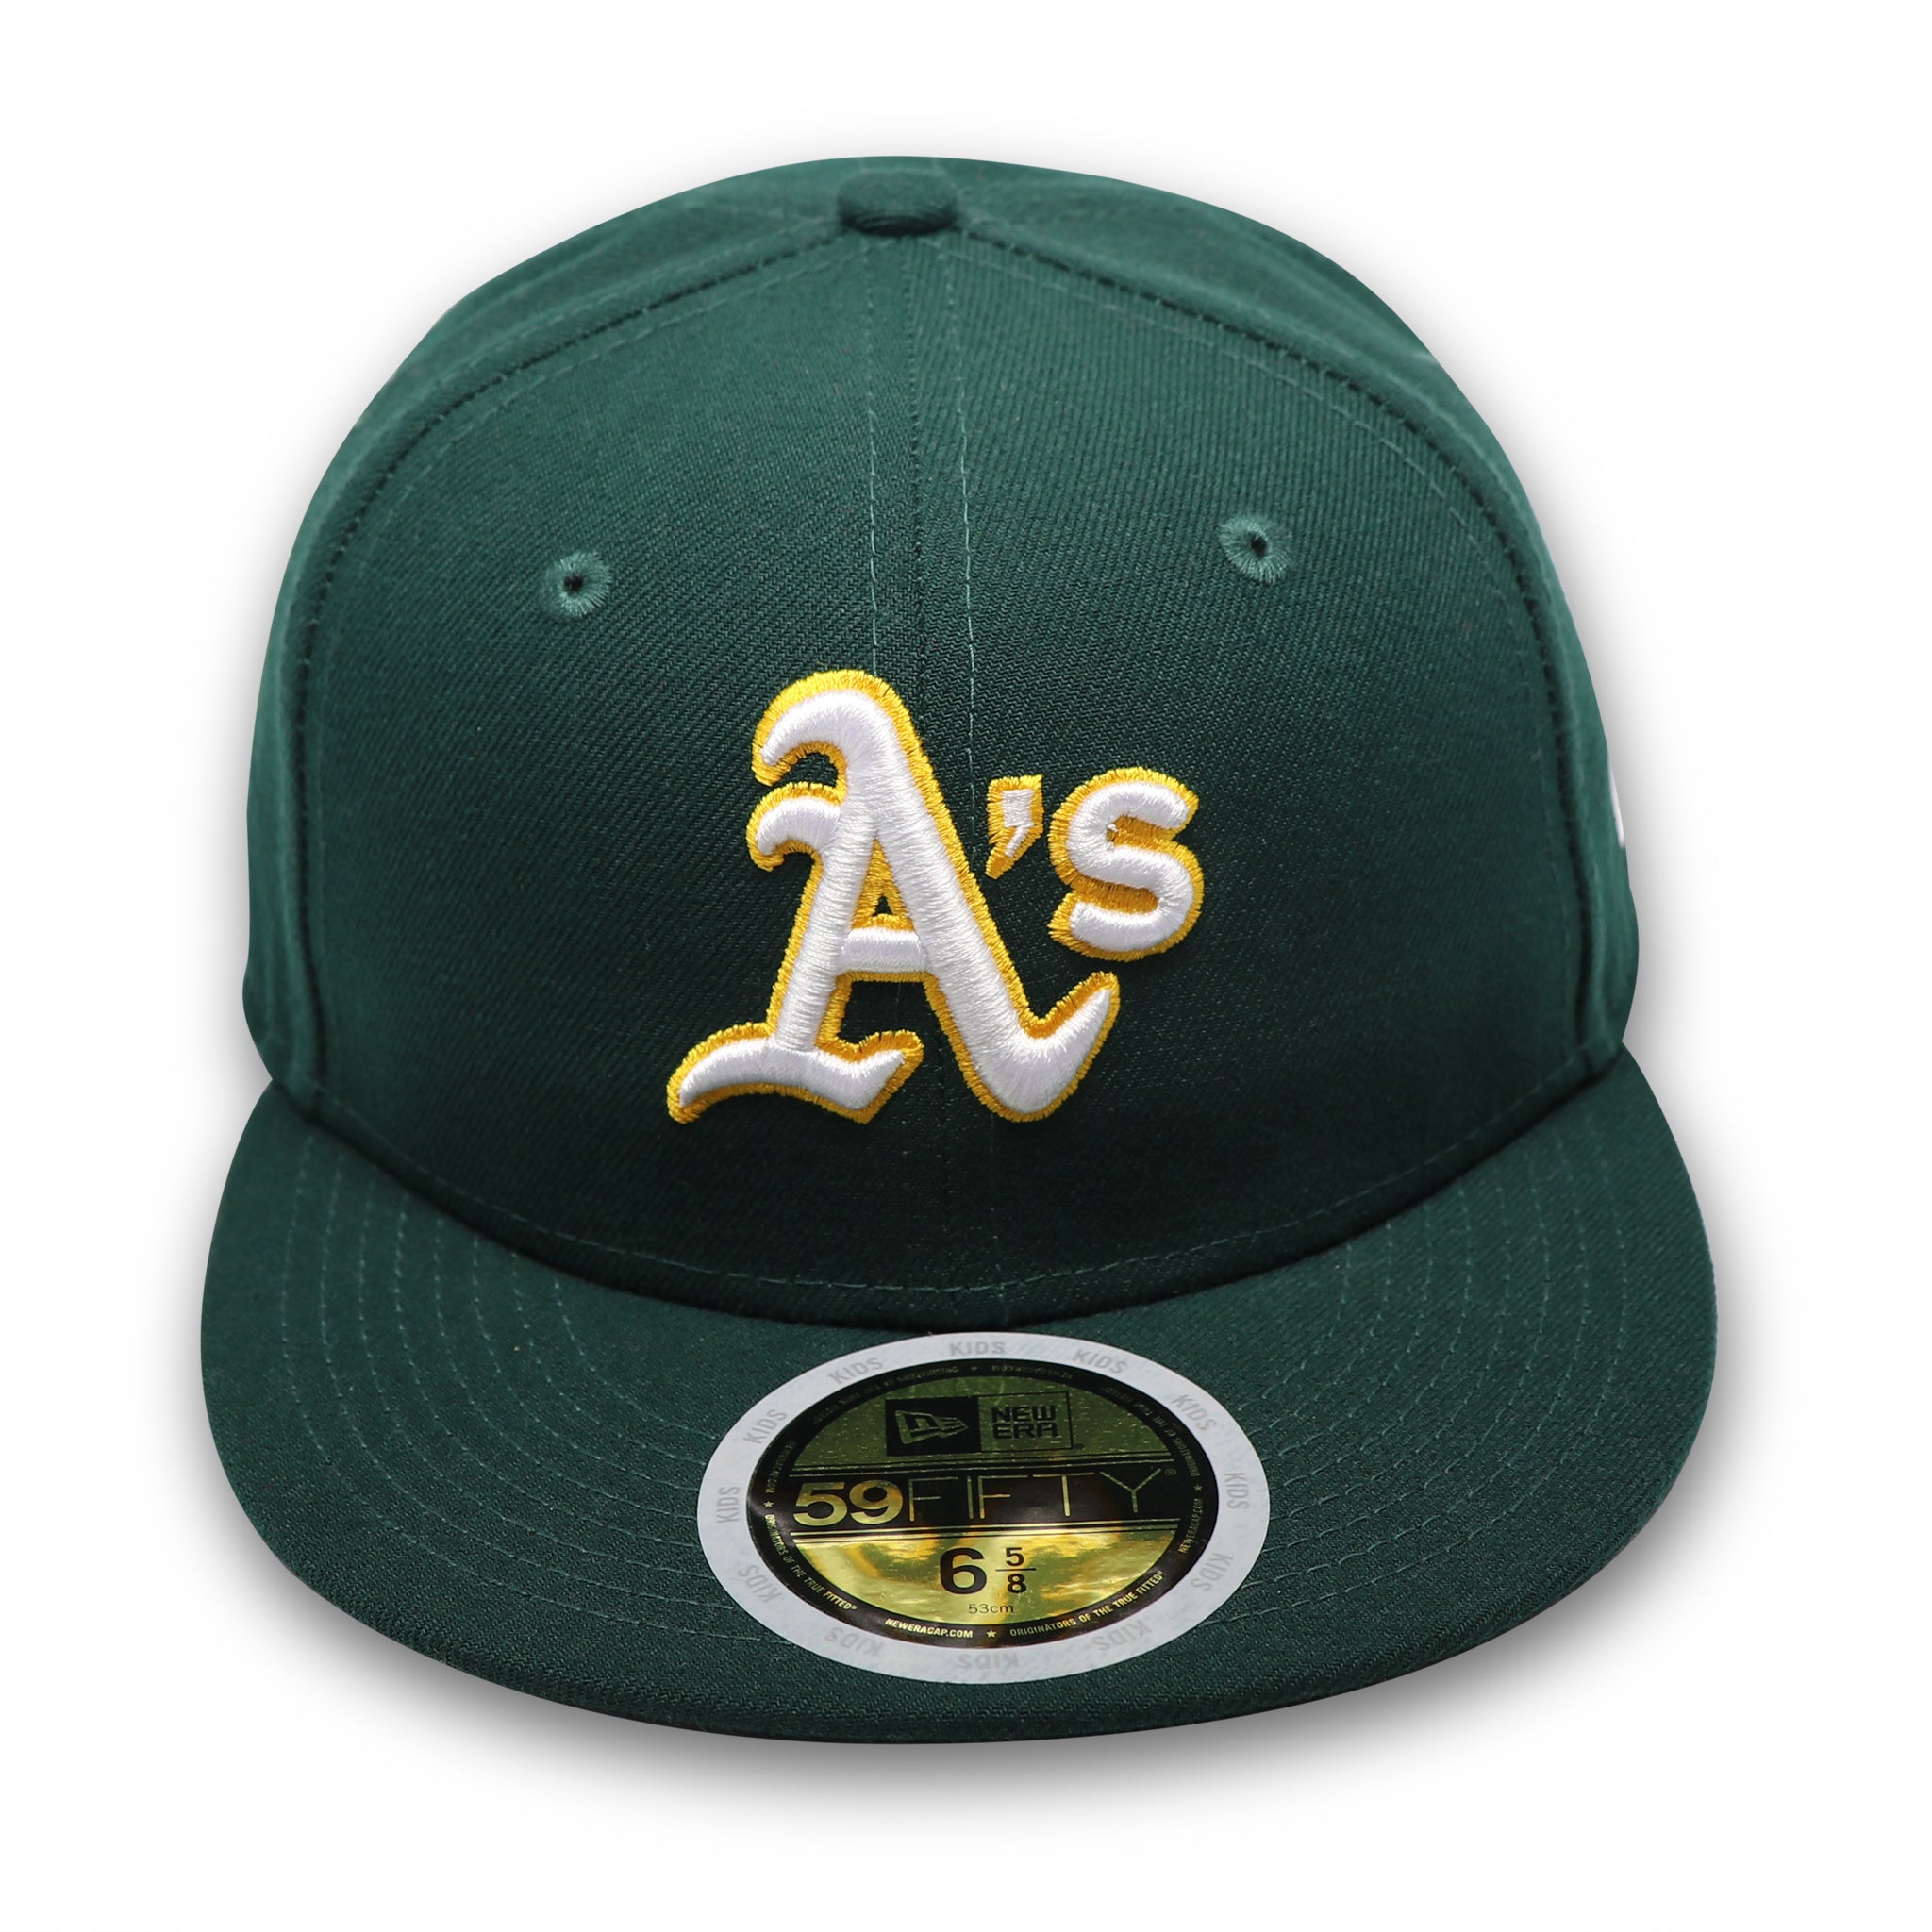 "KIDS" OAKLAND ATHLETICS (GREEN) NEW ERA 59FIFTY FITTED